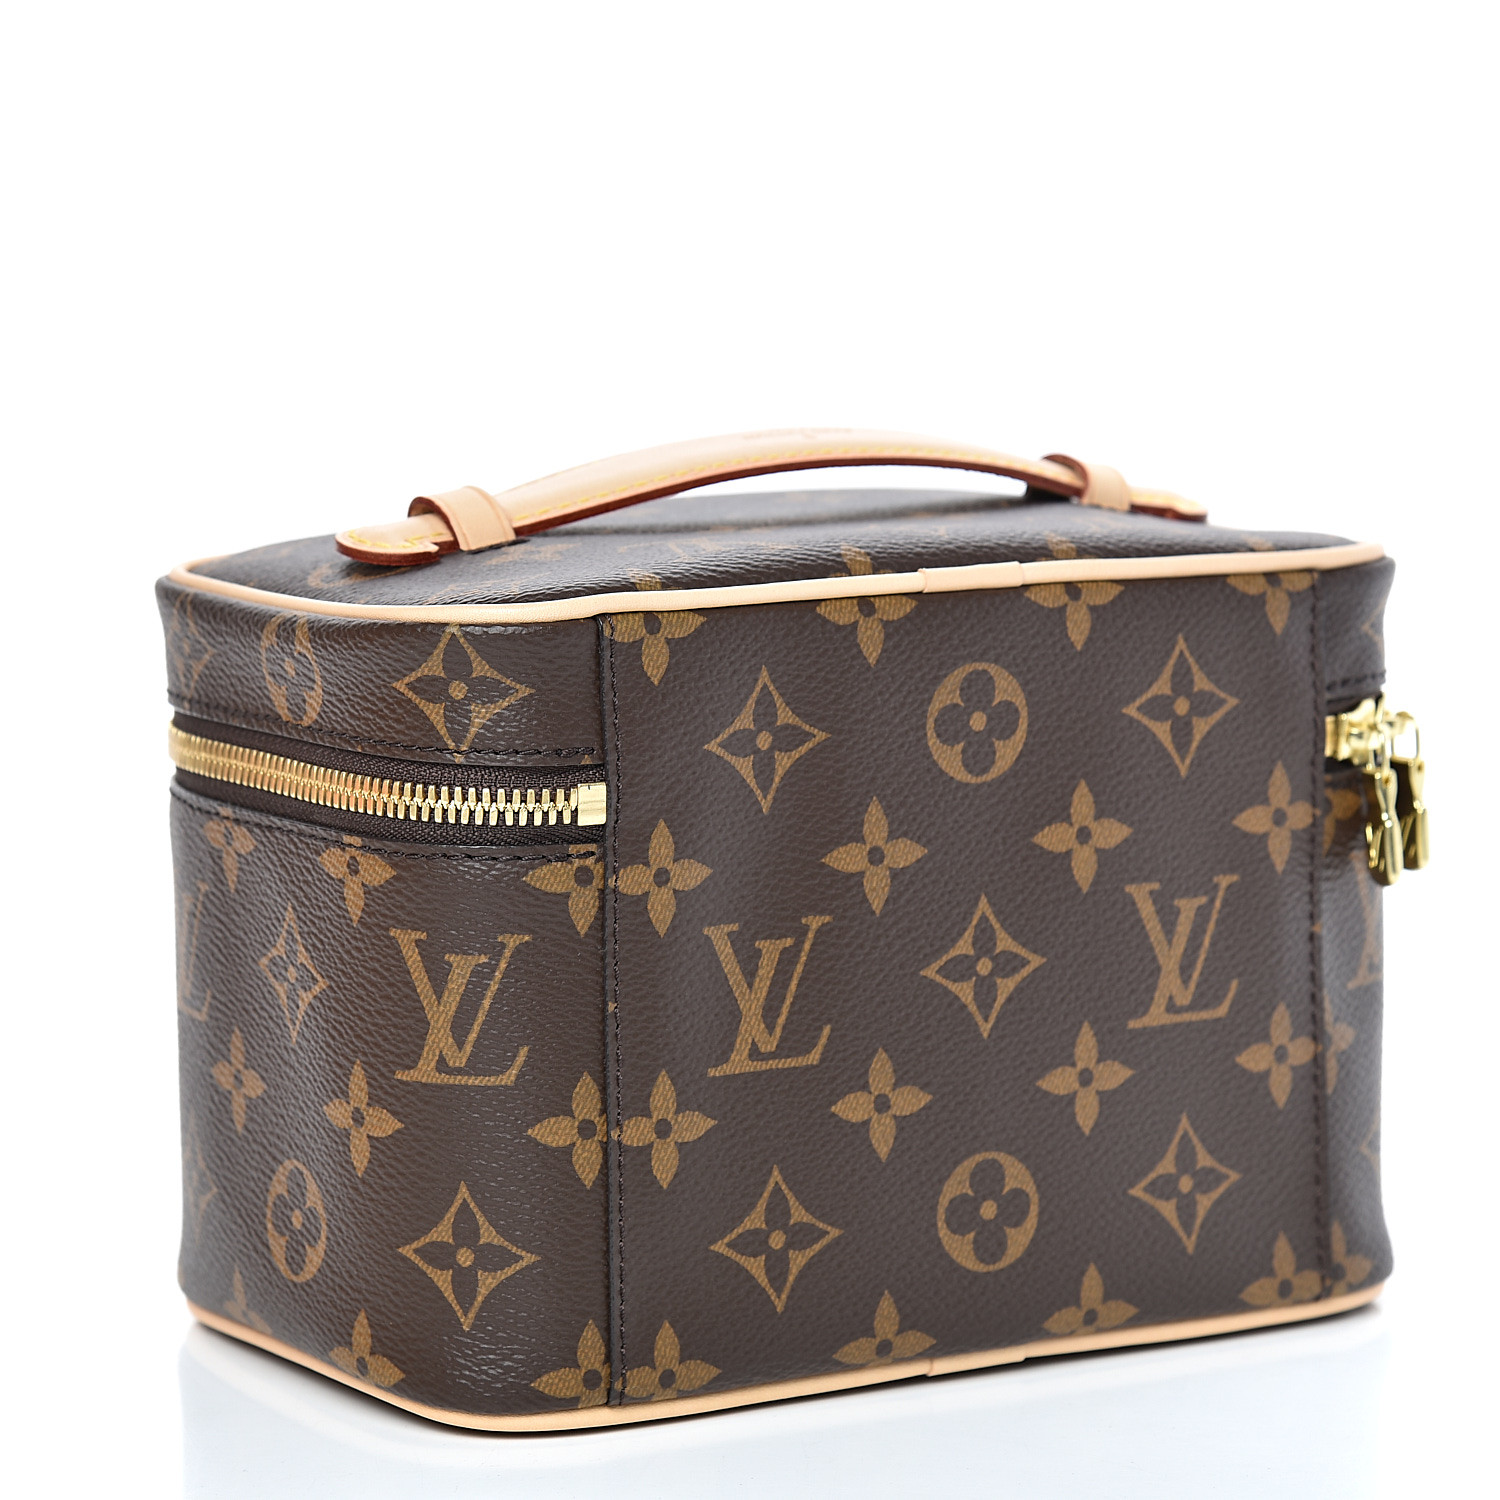 Sold at Auction: LOUIS VUITTON Beautycase NICE MINI, Coll.: 2022, act.  NP.: 900,-.